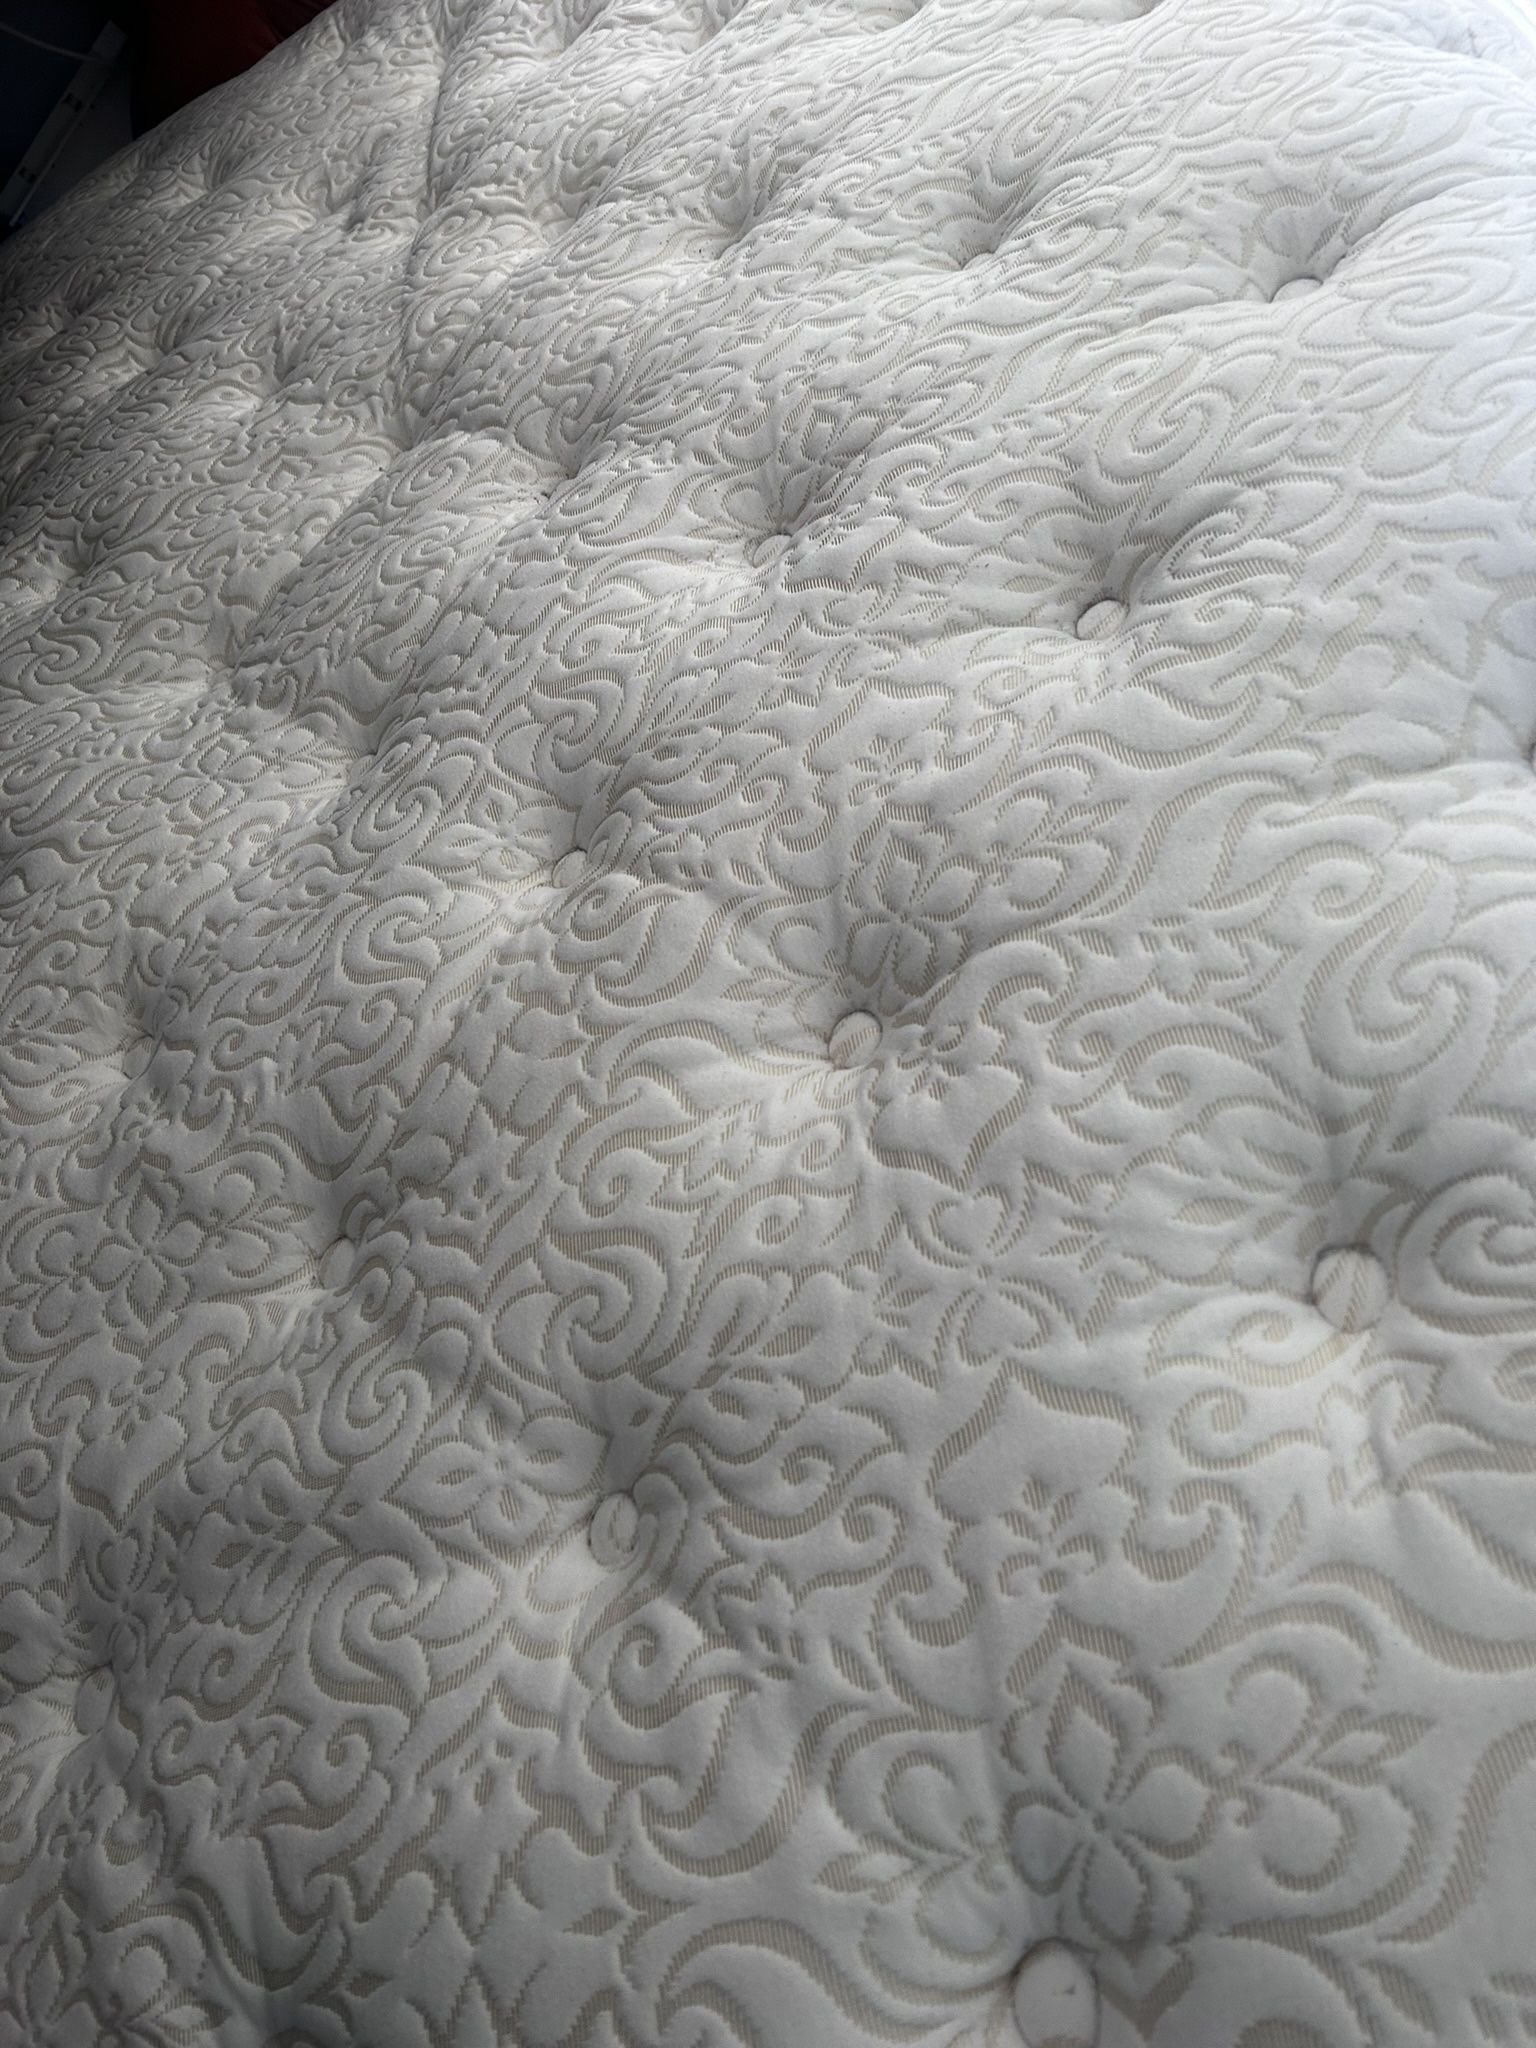 Sleepys Pillow Top - Queen Super Comfy No Stains,smoke Free